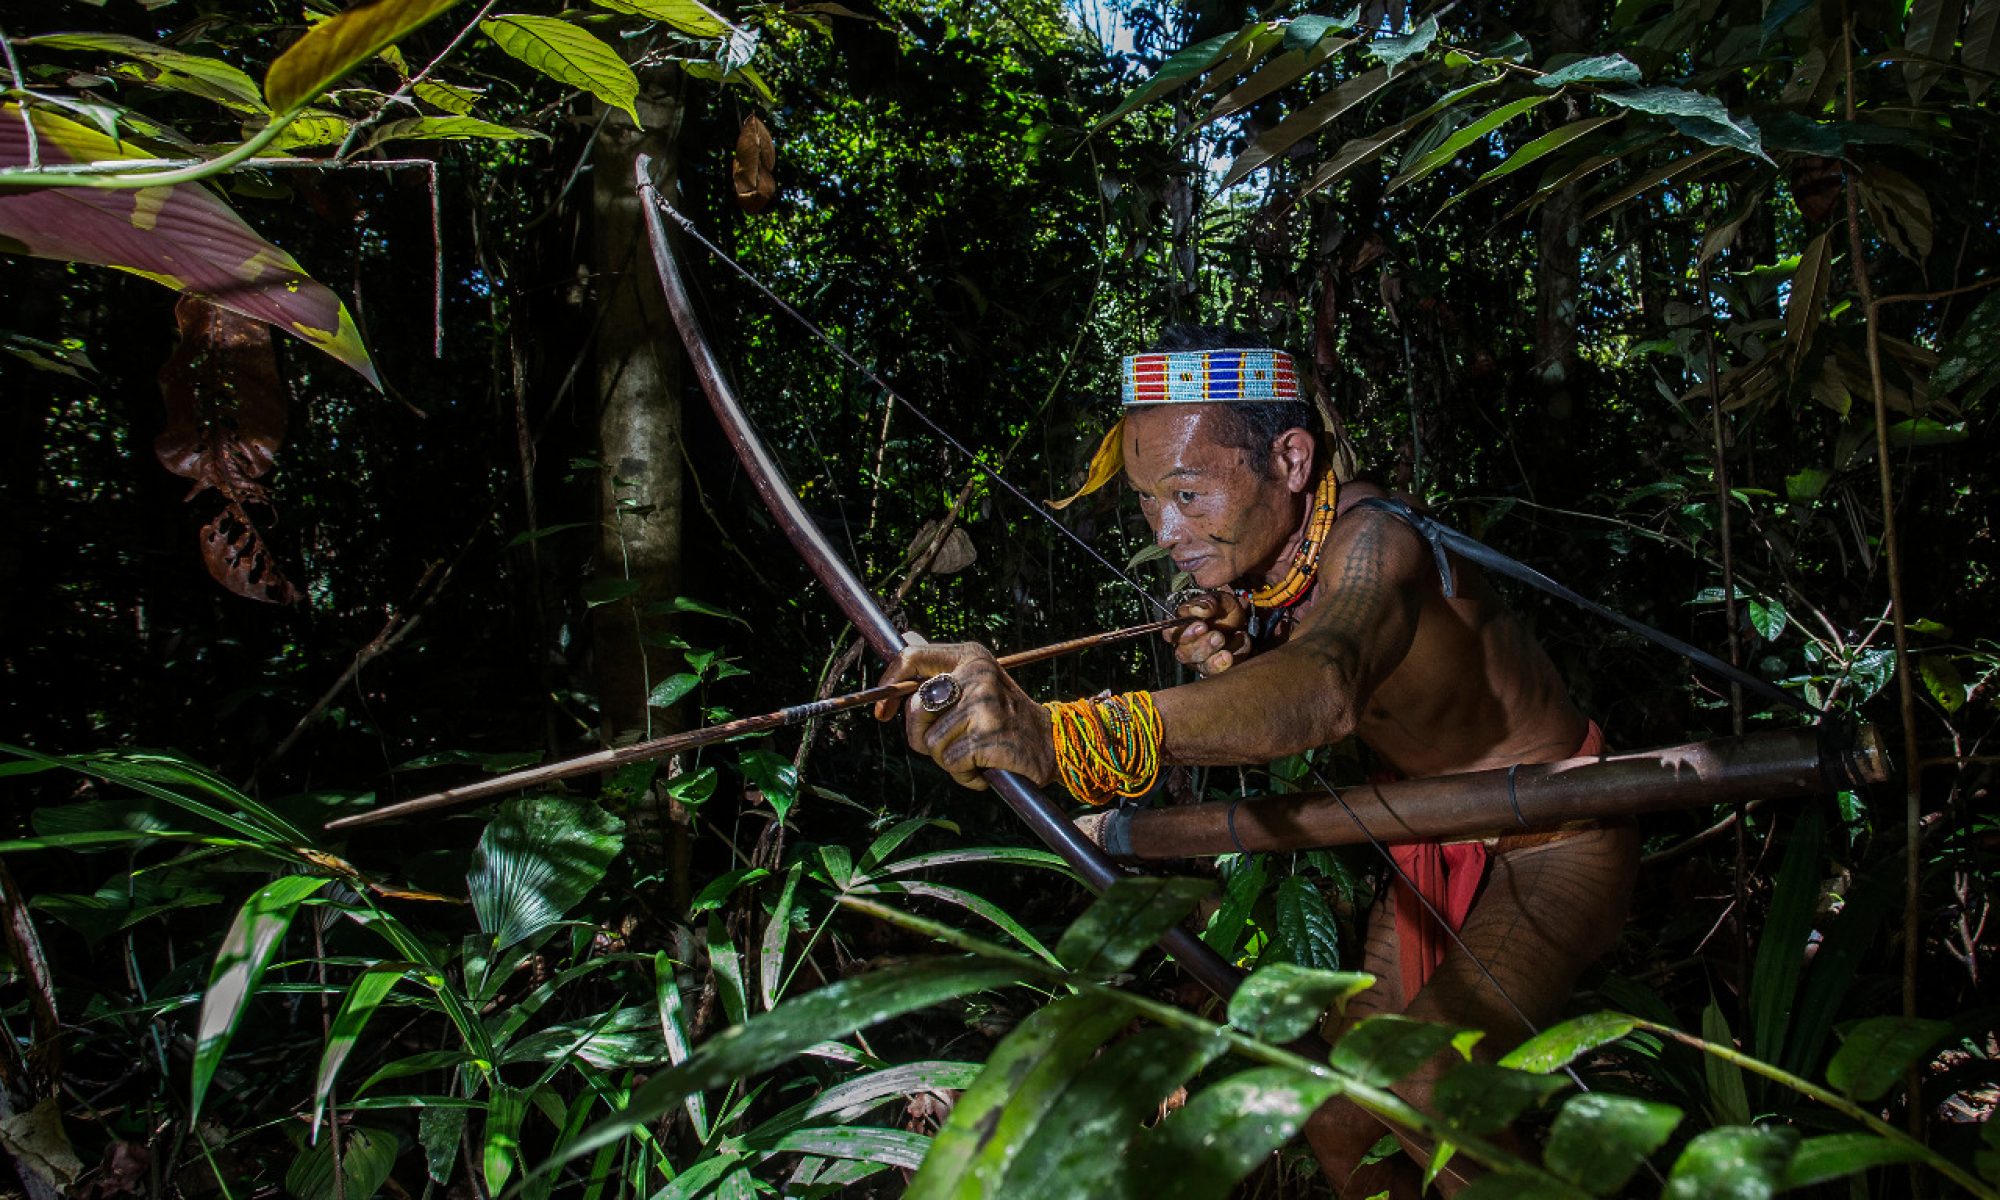 Concocting Arrow Poison by mentawai tribe